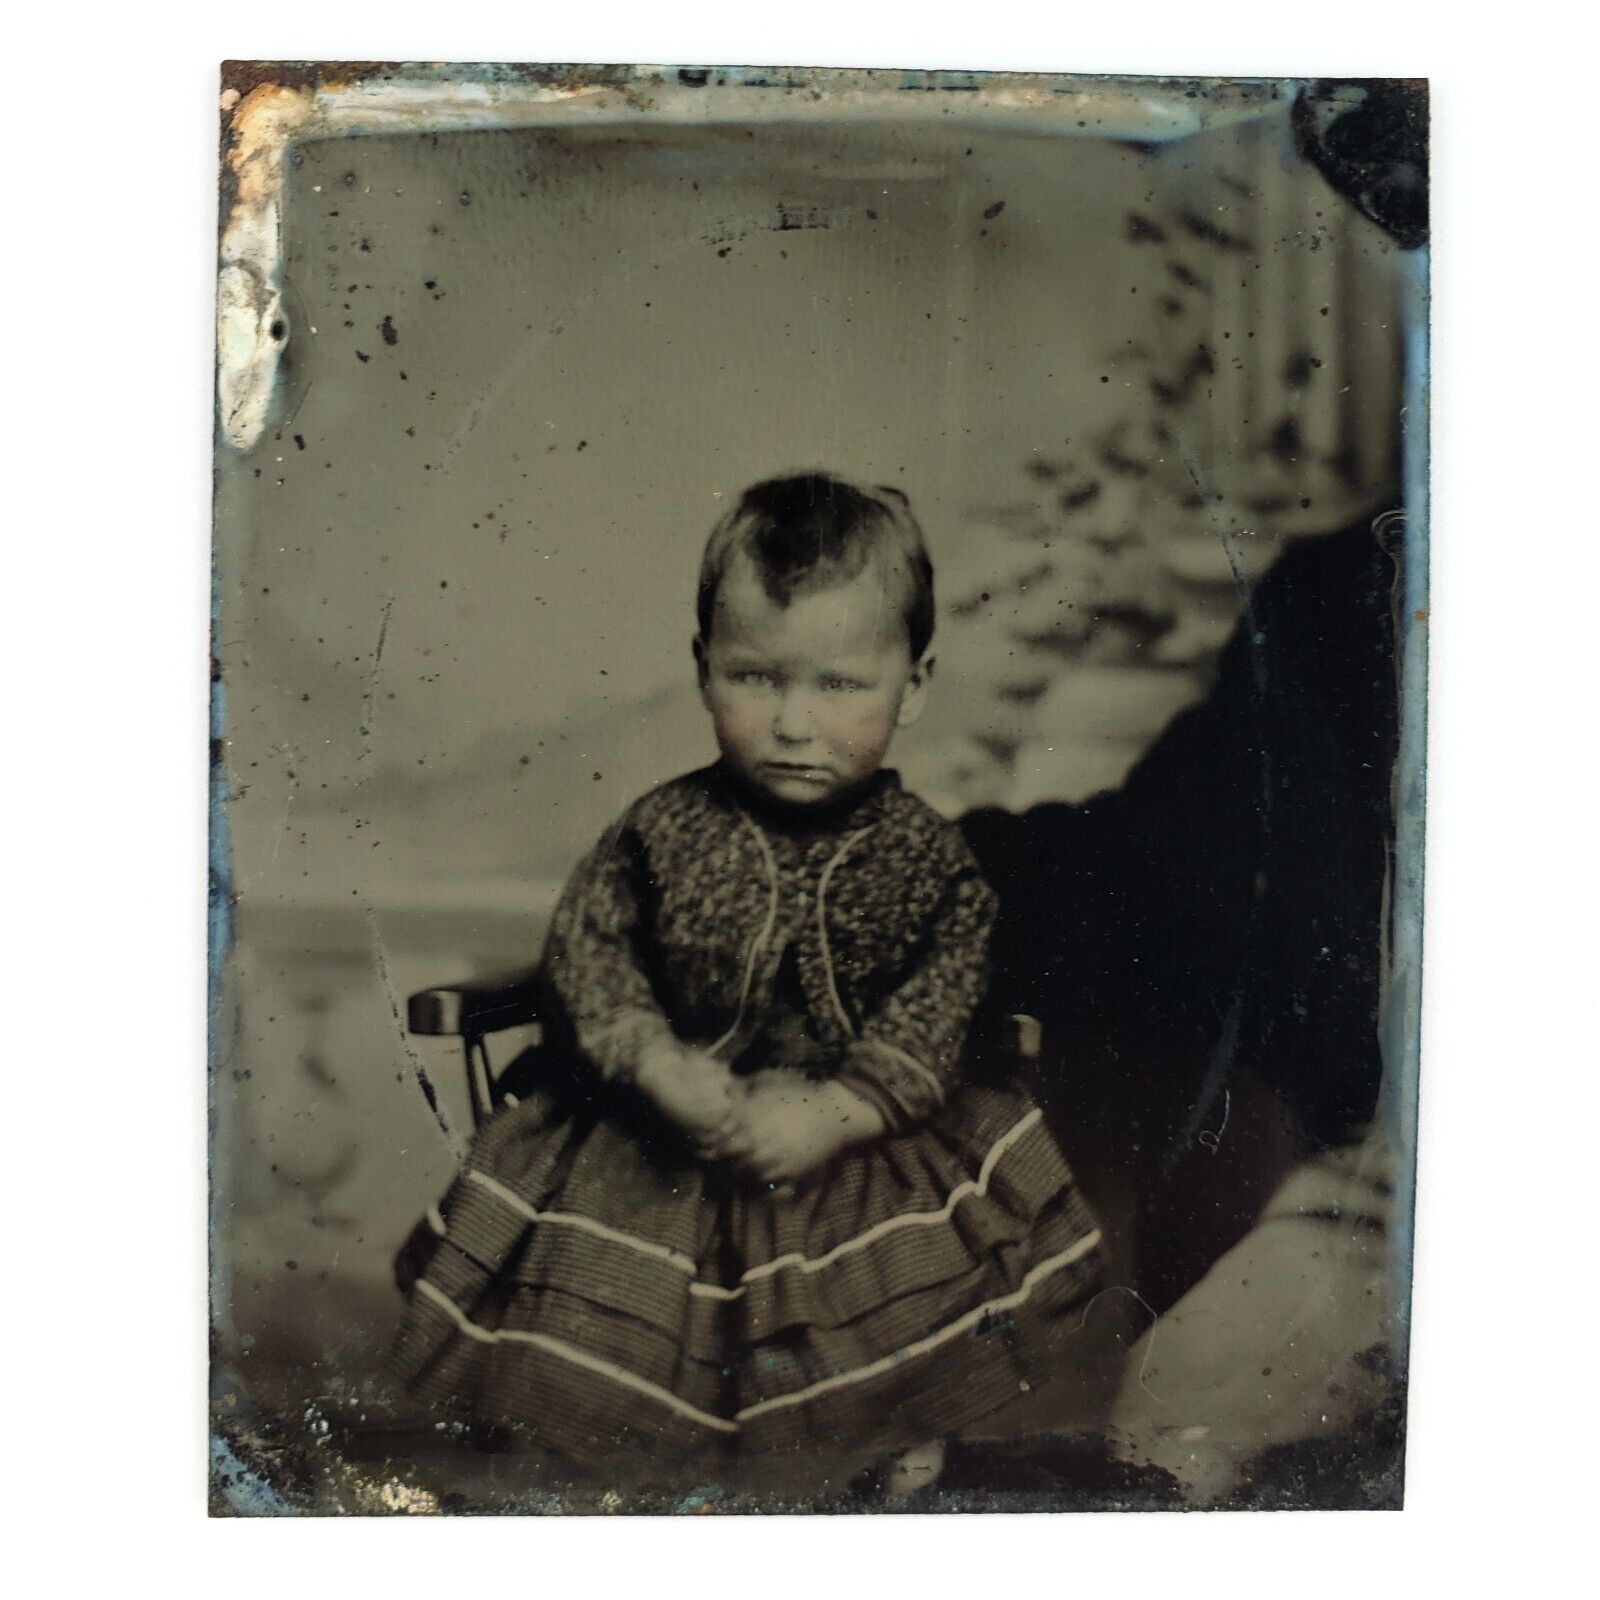 Blurry Hands Child Portrait Tintype c1870 Hidden Mother Revealed 1/6 Plate A3643